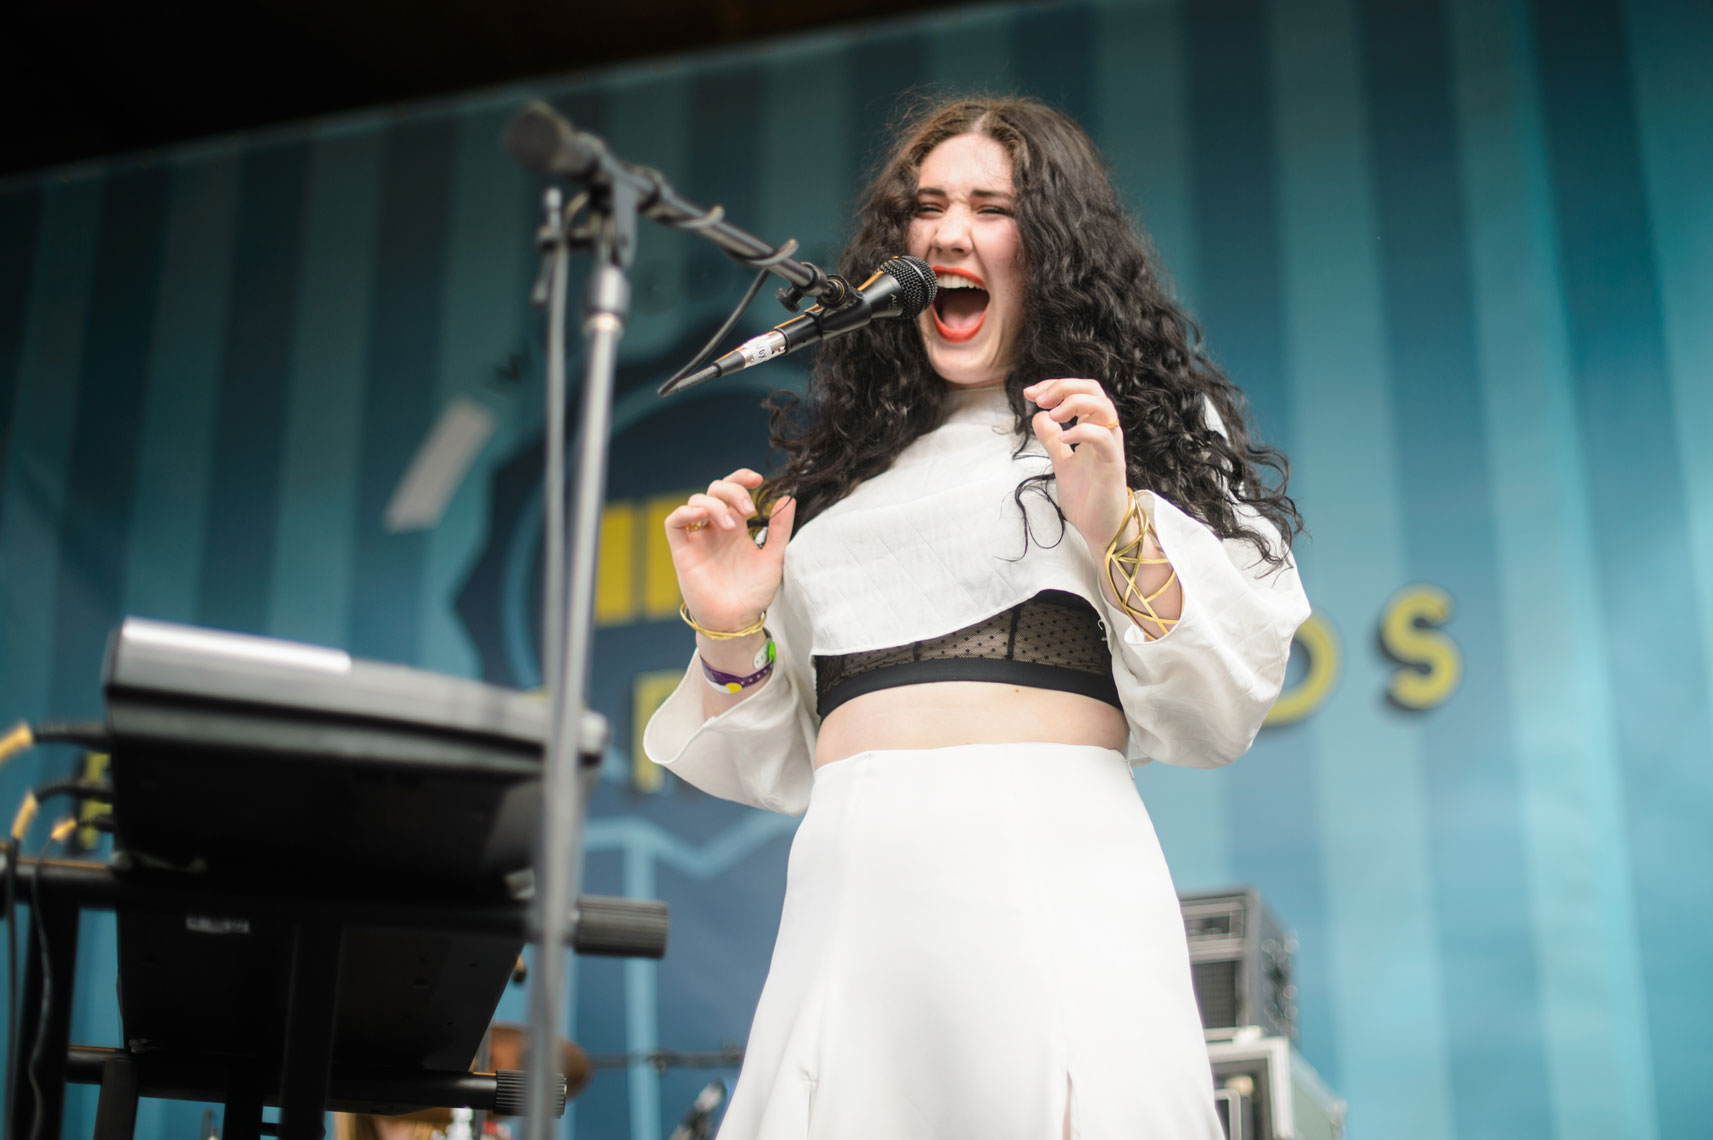 White-Sea-performs-at-the-IFC-Playground-during-SXSW-2014-2